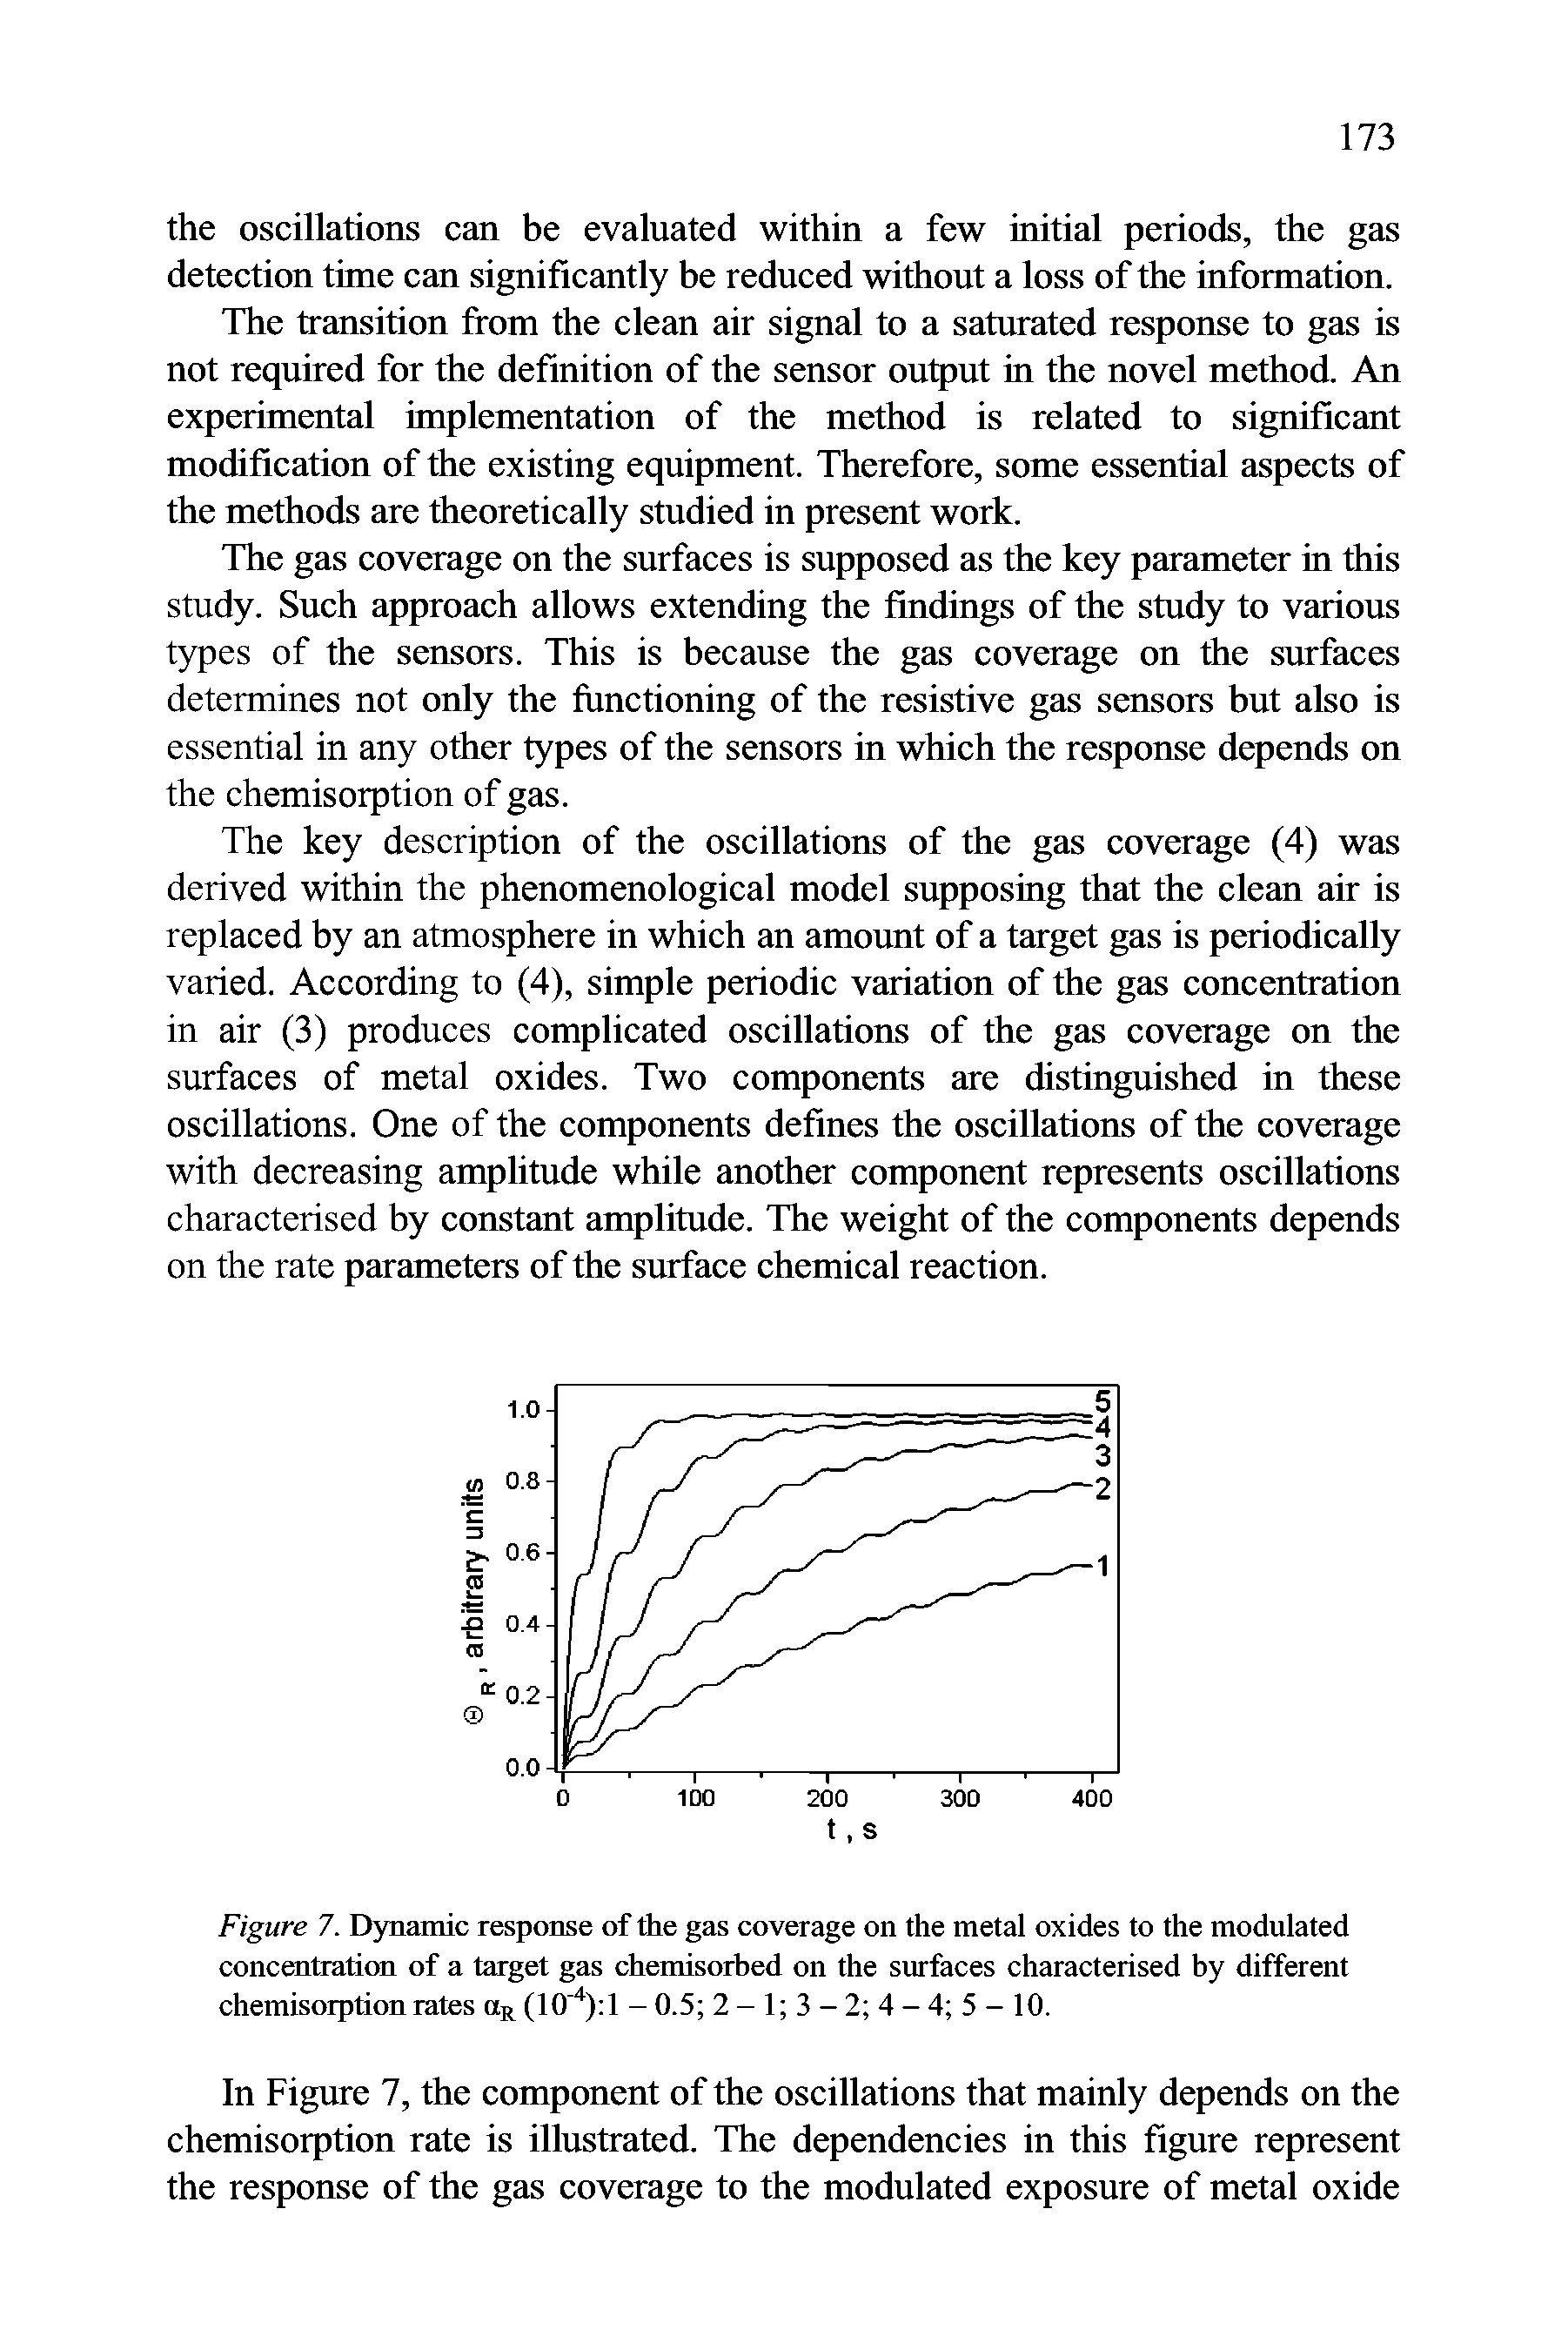 Figure 7. Dynamic response of the gas coverage on the metal oxides to the modulated concentration of a target gas chemisorhed on the surfaces characterised hy different chemisorption rates (lO" ) - 0.5 2 - 1 3 - 2 4 - 4 5 - 10.